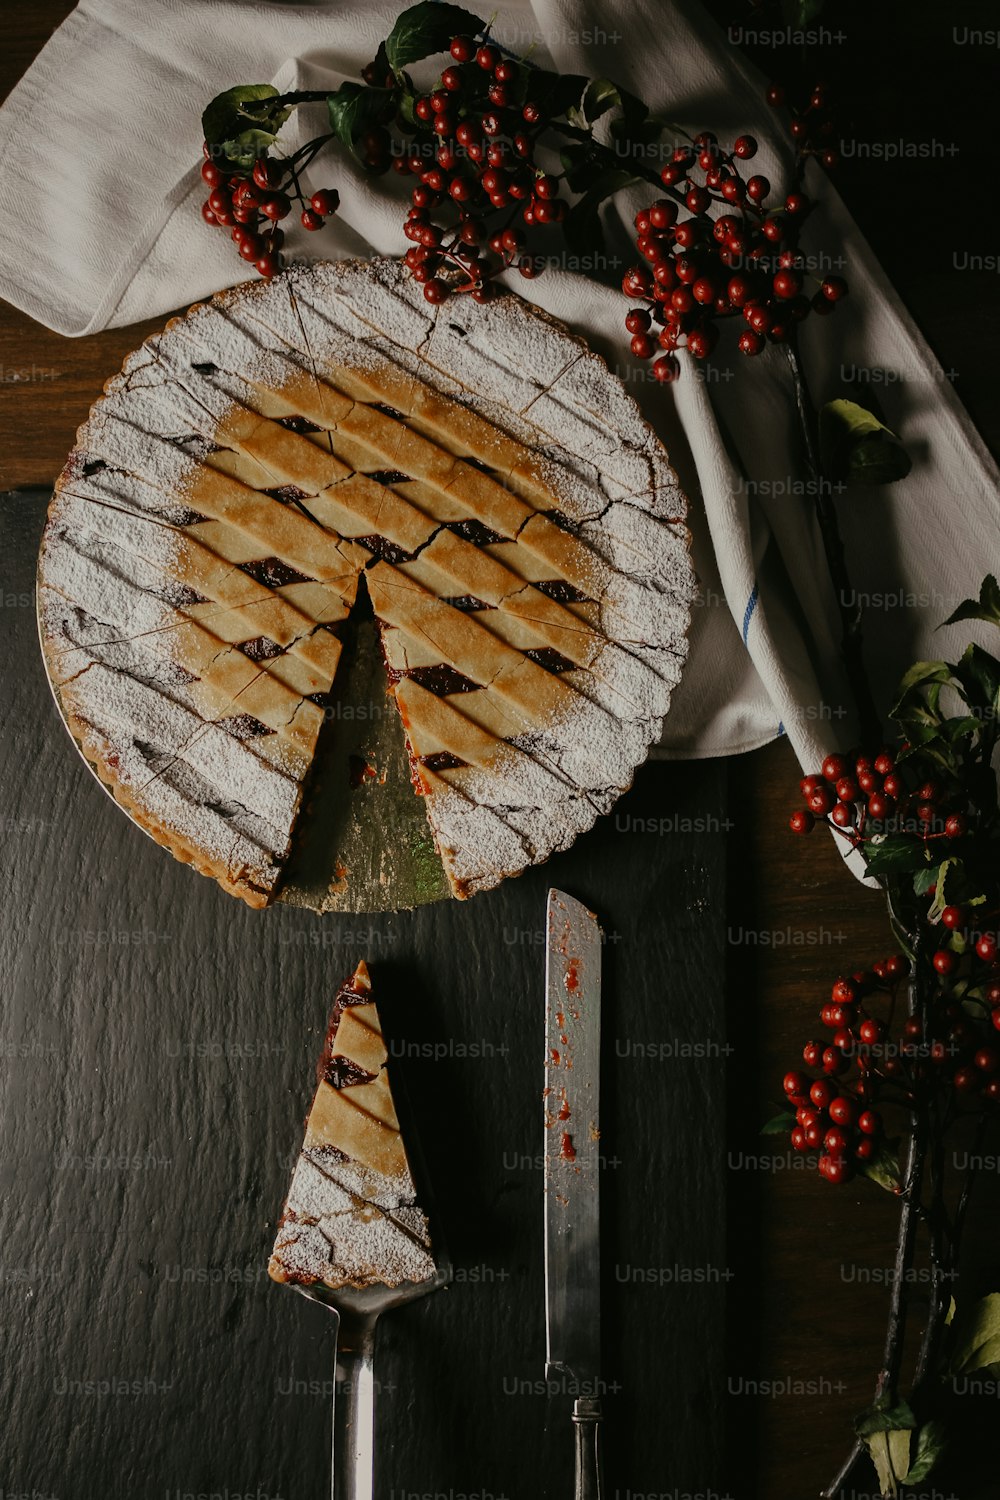 a pie sitting on top of a cutting board next to a knife